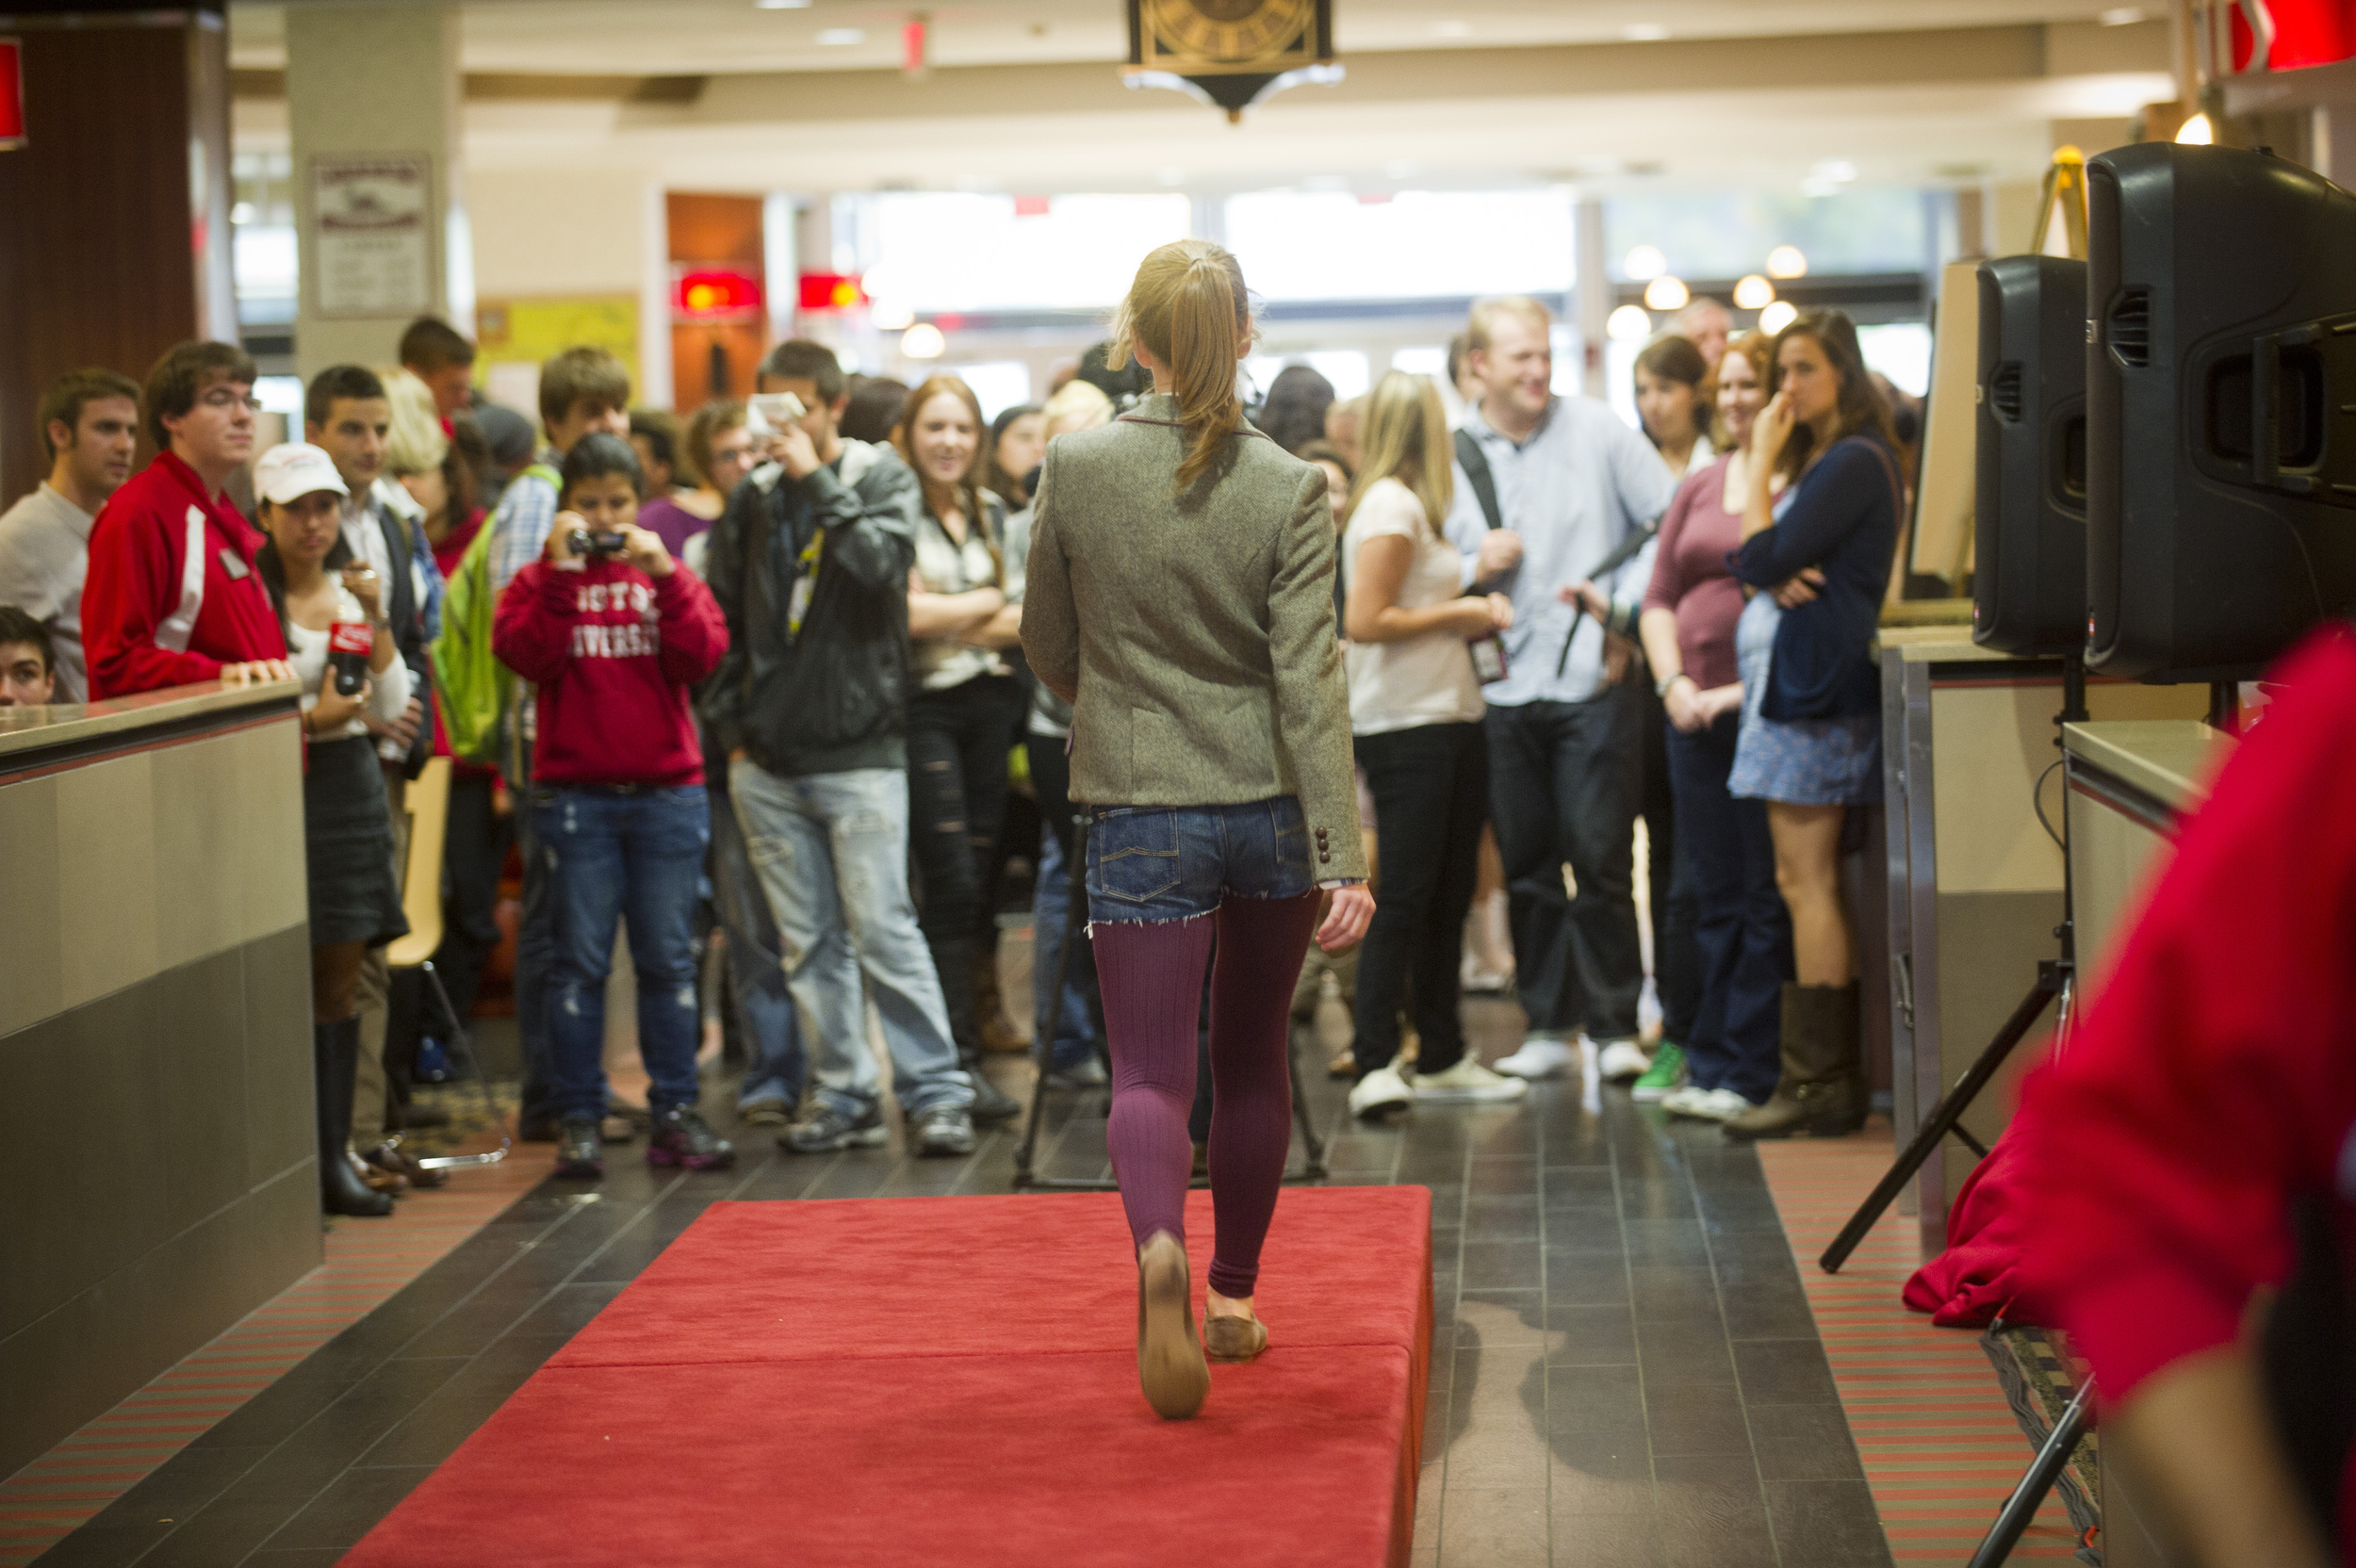  Taylor Stein (SMG14) hits the impromptu runway during the Fashion Show Flash mob at the GSU October 14, 2011. 